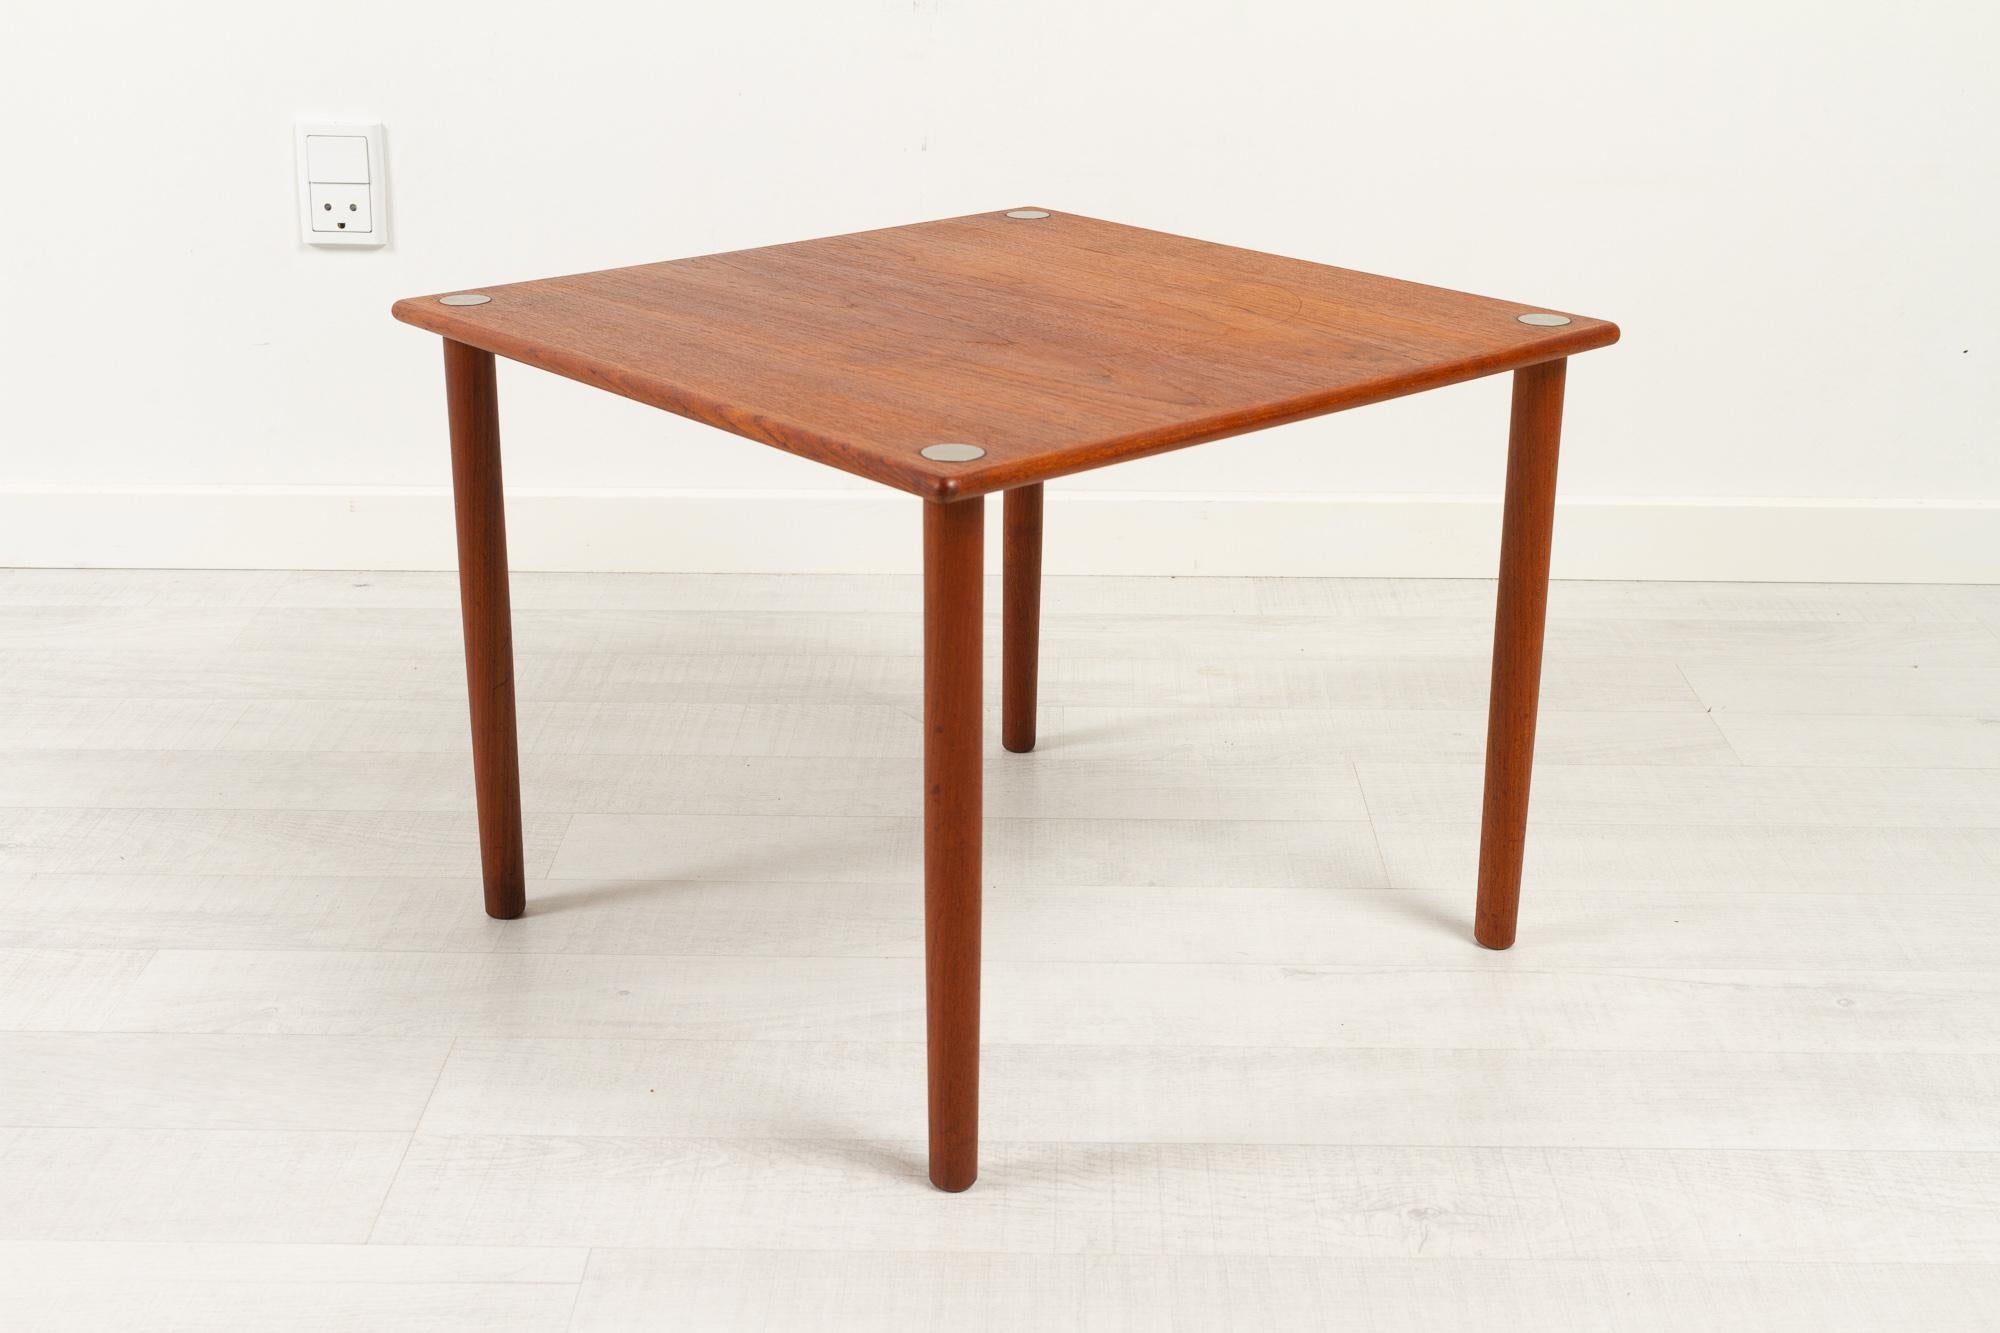 Vintage Danish Teak Side table by Georg Petersen, 1960s.
Danish mid-century modern occasional table in teak and aluminium. Made by by Georg Petersens Møbelfabrik, Denmark, in the 1960s.
Charming and versatile teak table with aluminium details on the